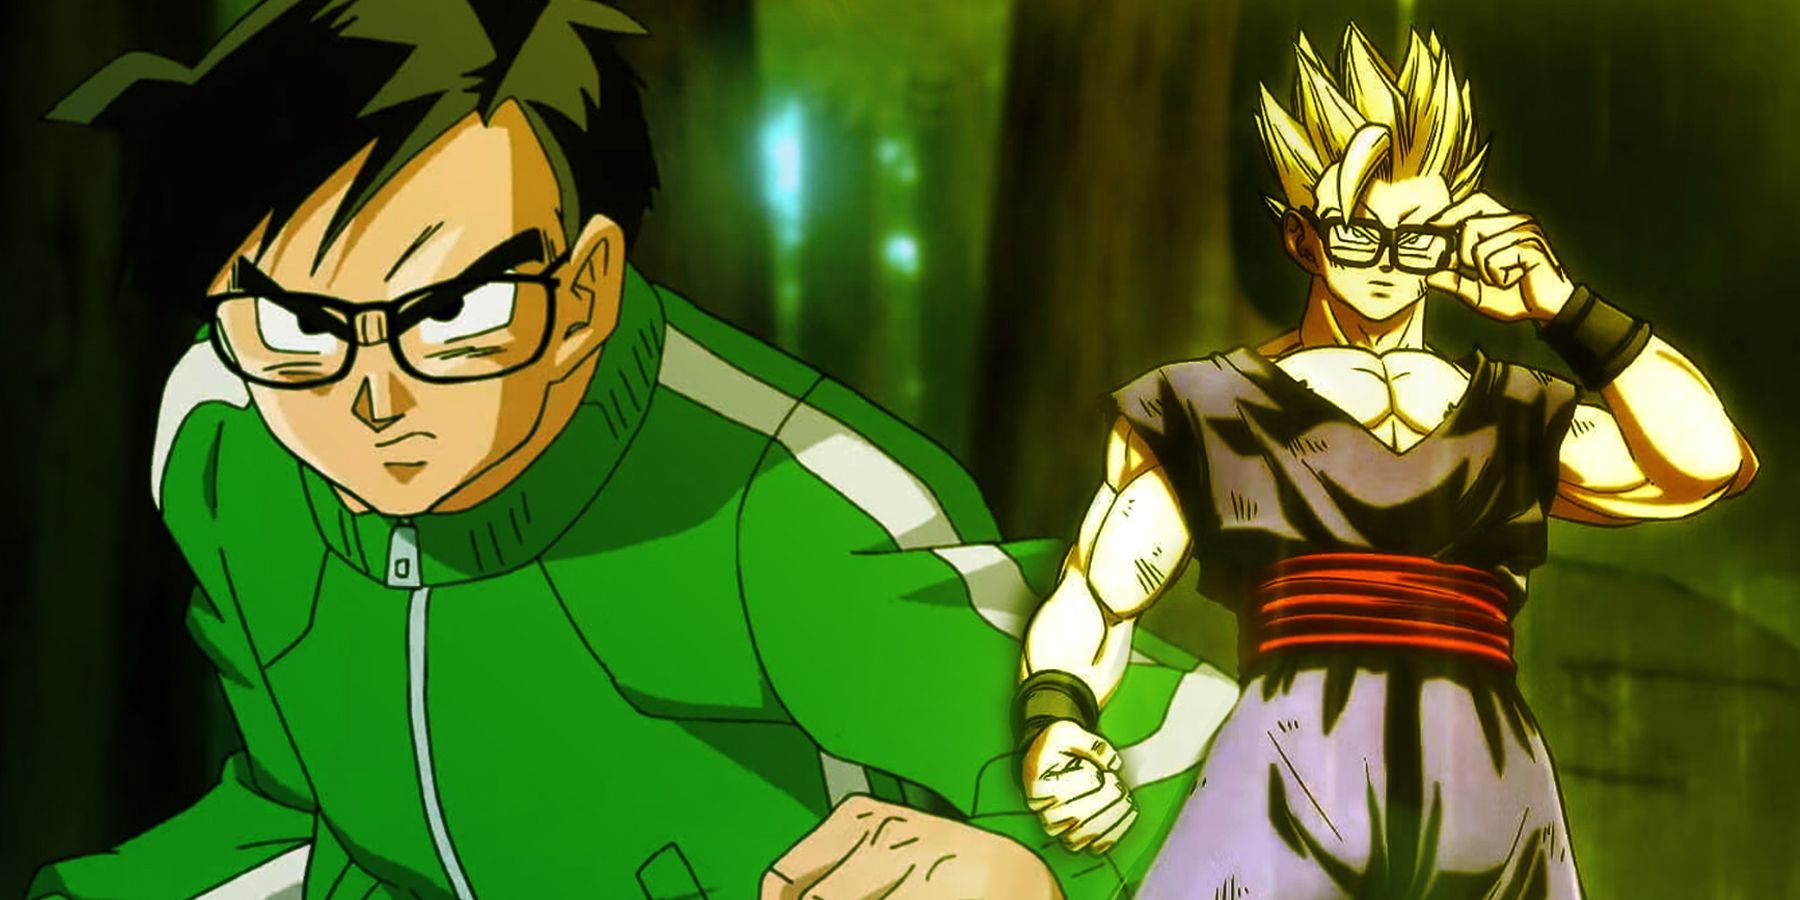 Dragon Ball Super: Super Hero Was Wrong to Make Gohan Fight Again